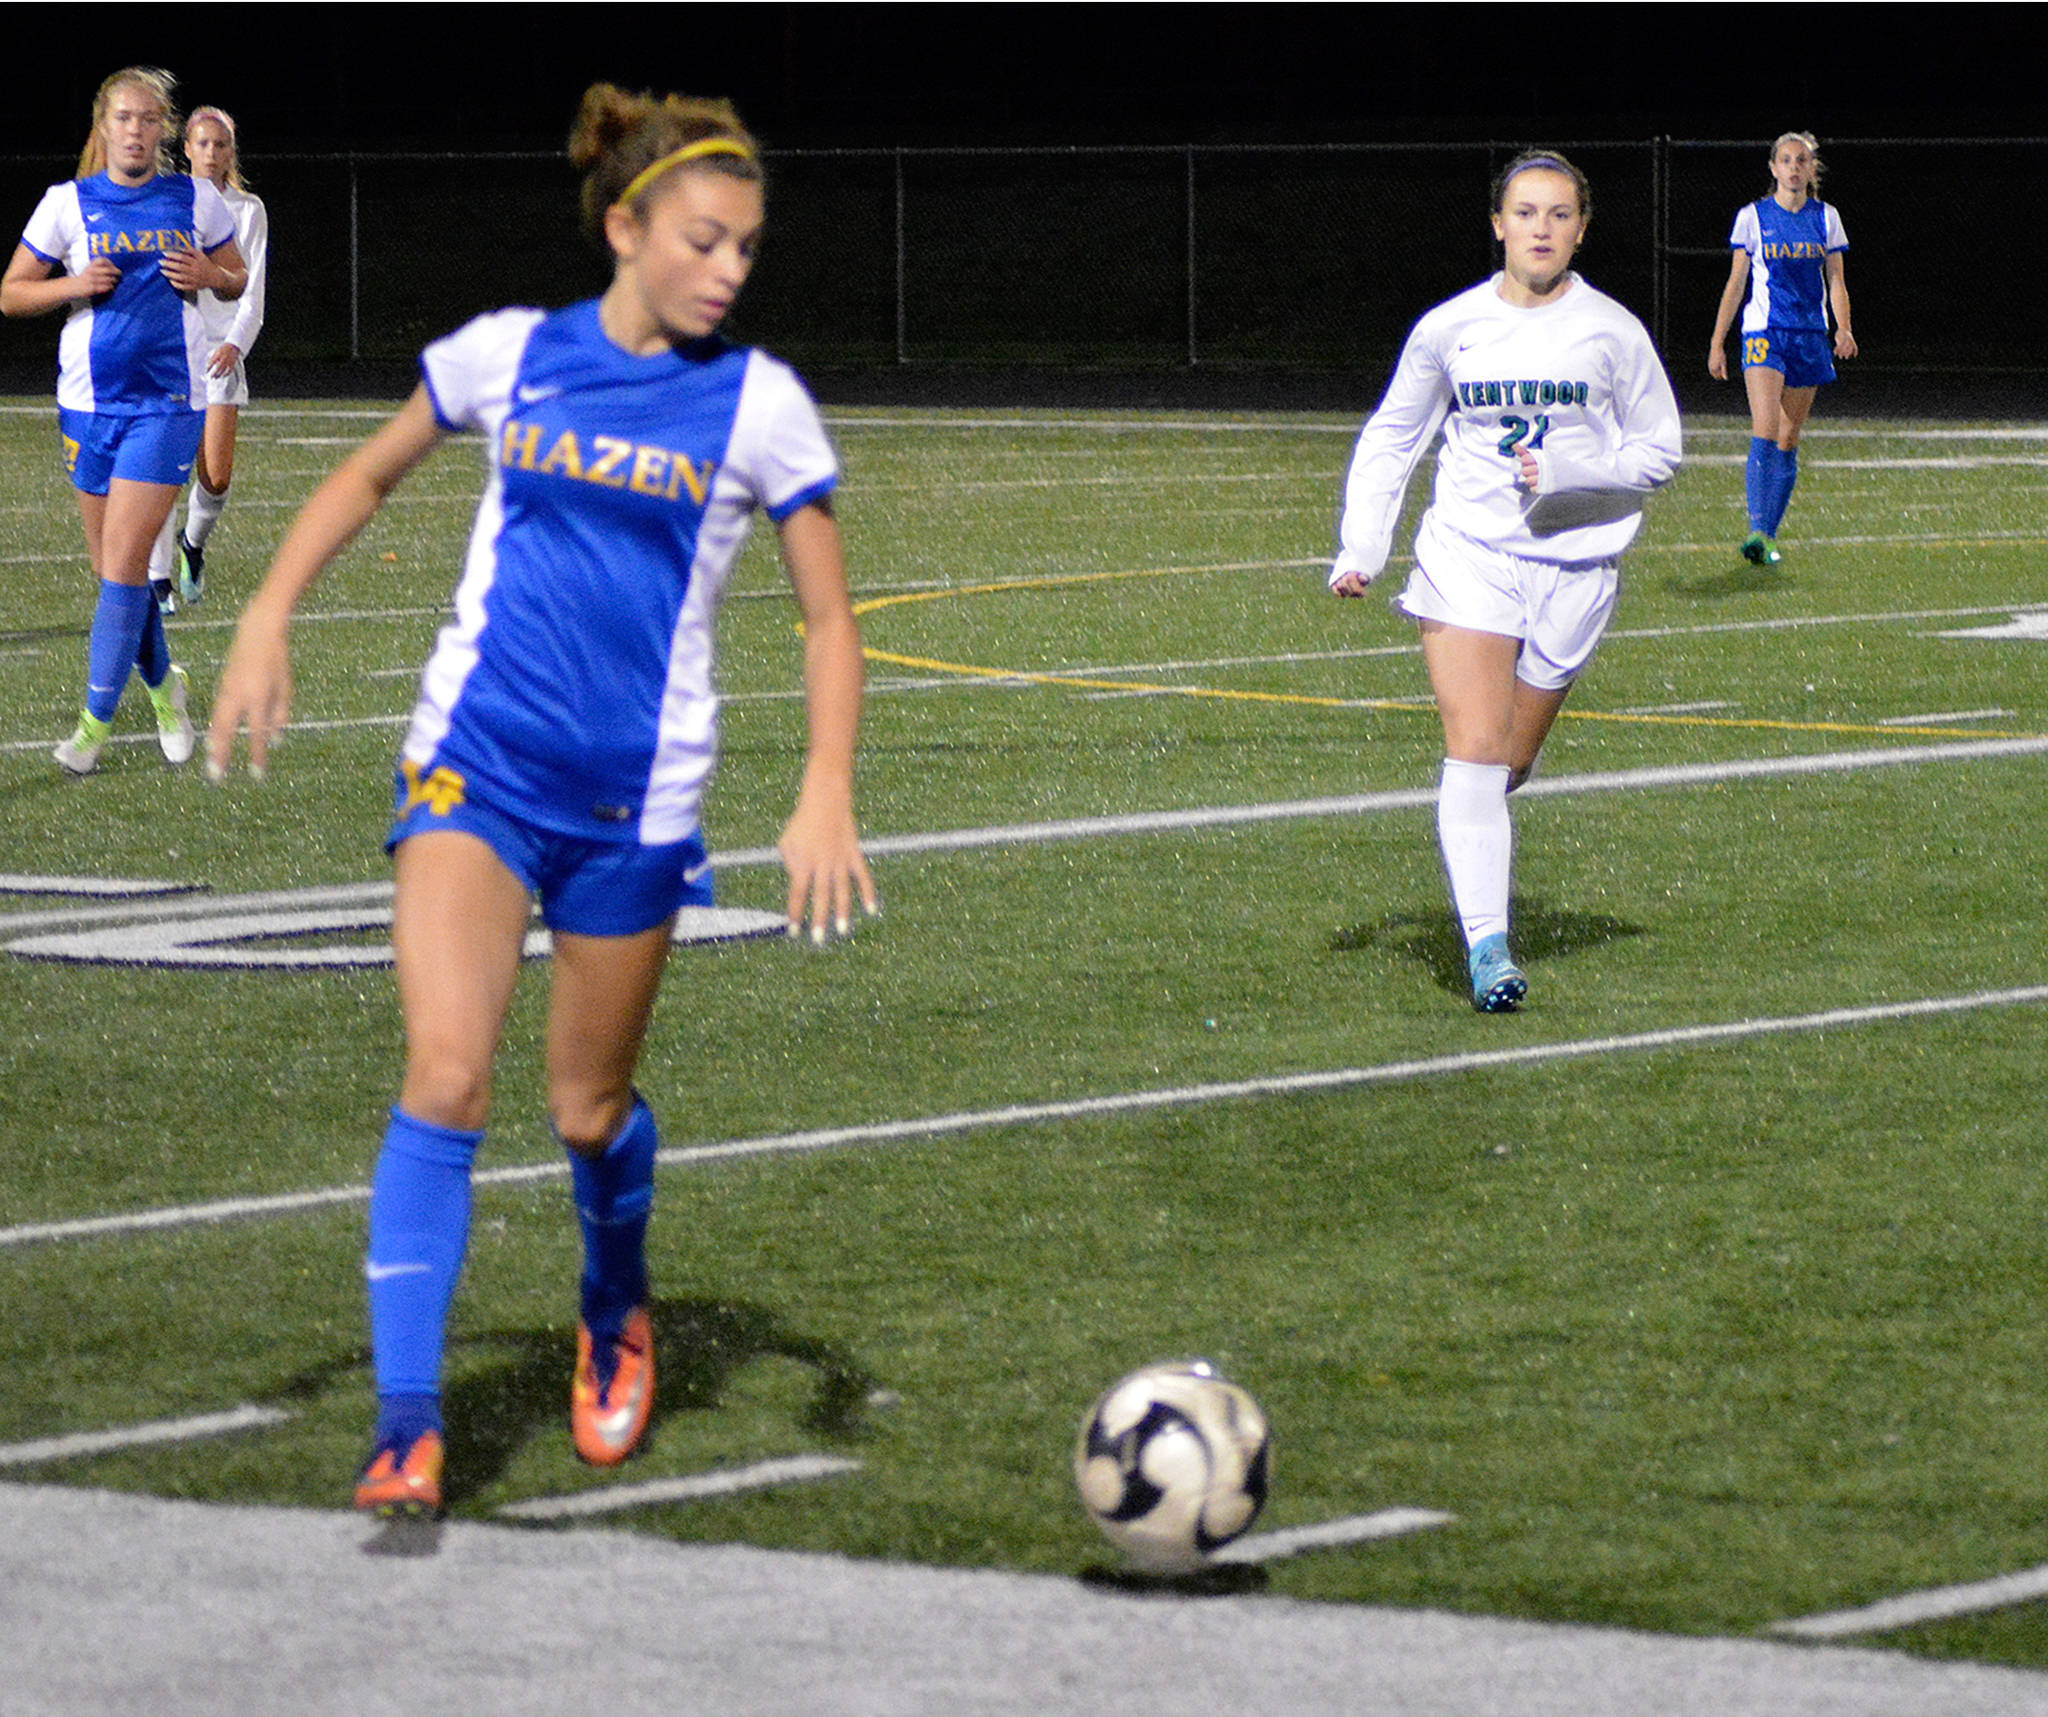 Girls soccer teams close out season, eyes on playoffs